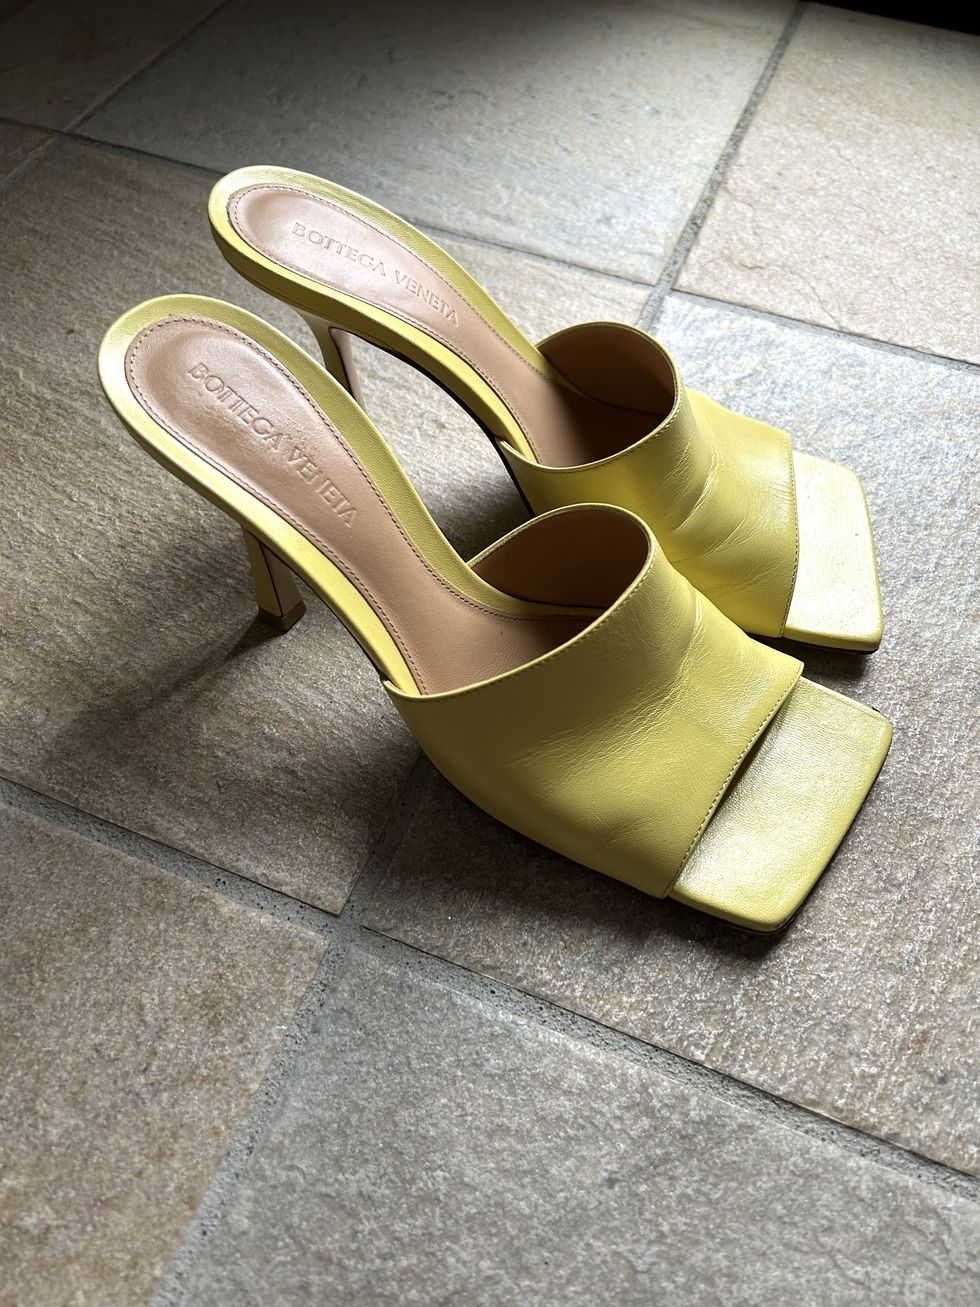 a pair of yellow sandals